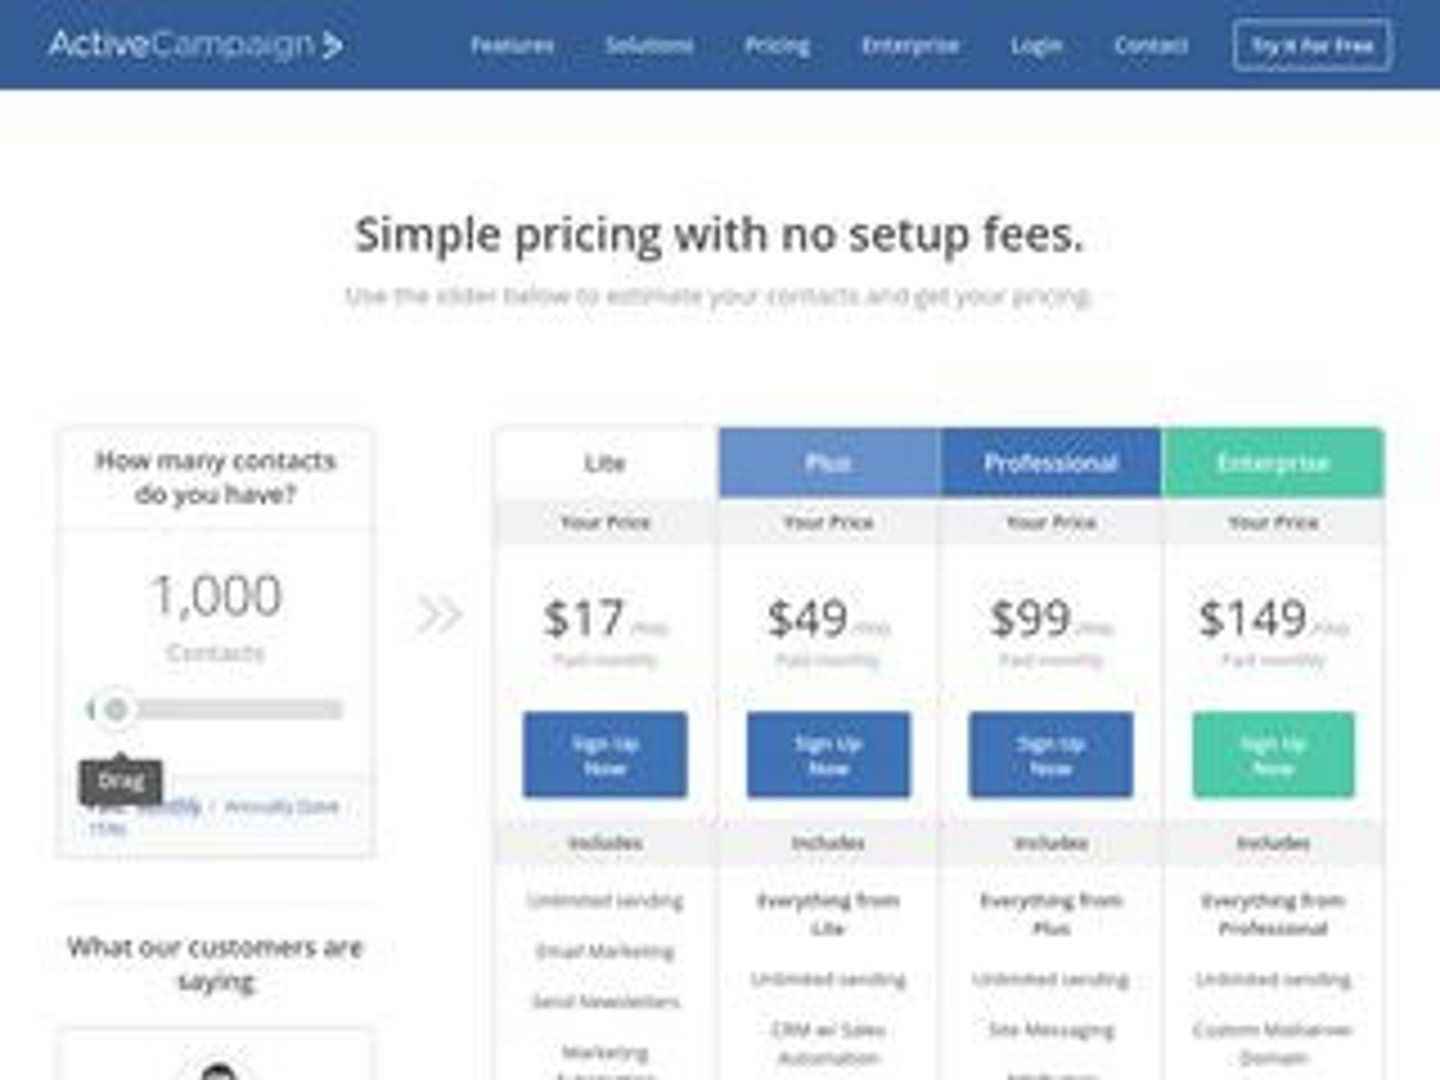 Activecampaign Pricing